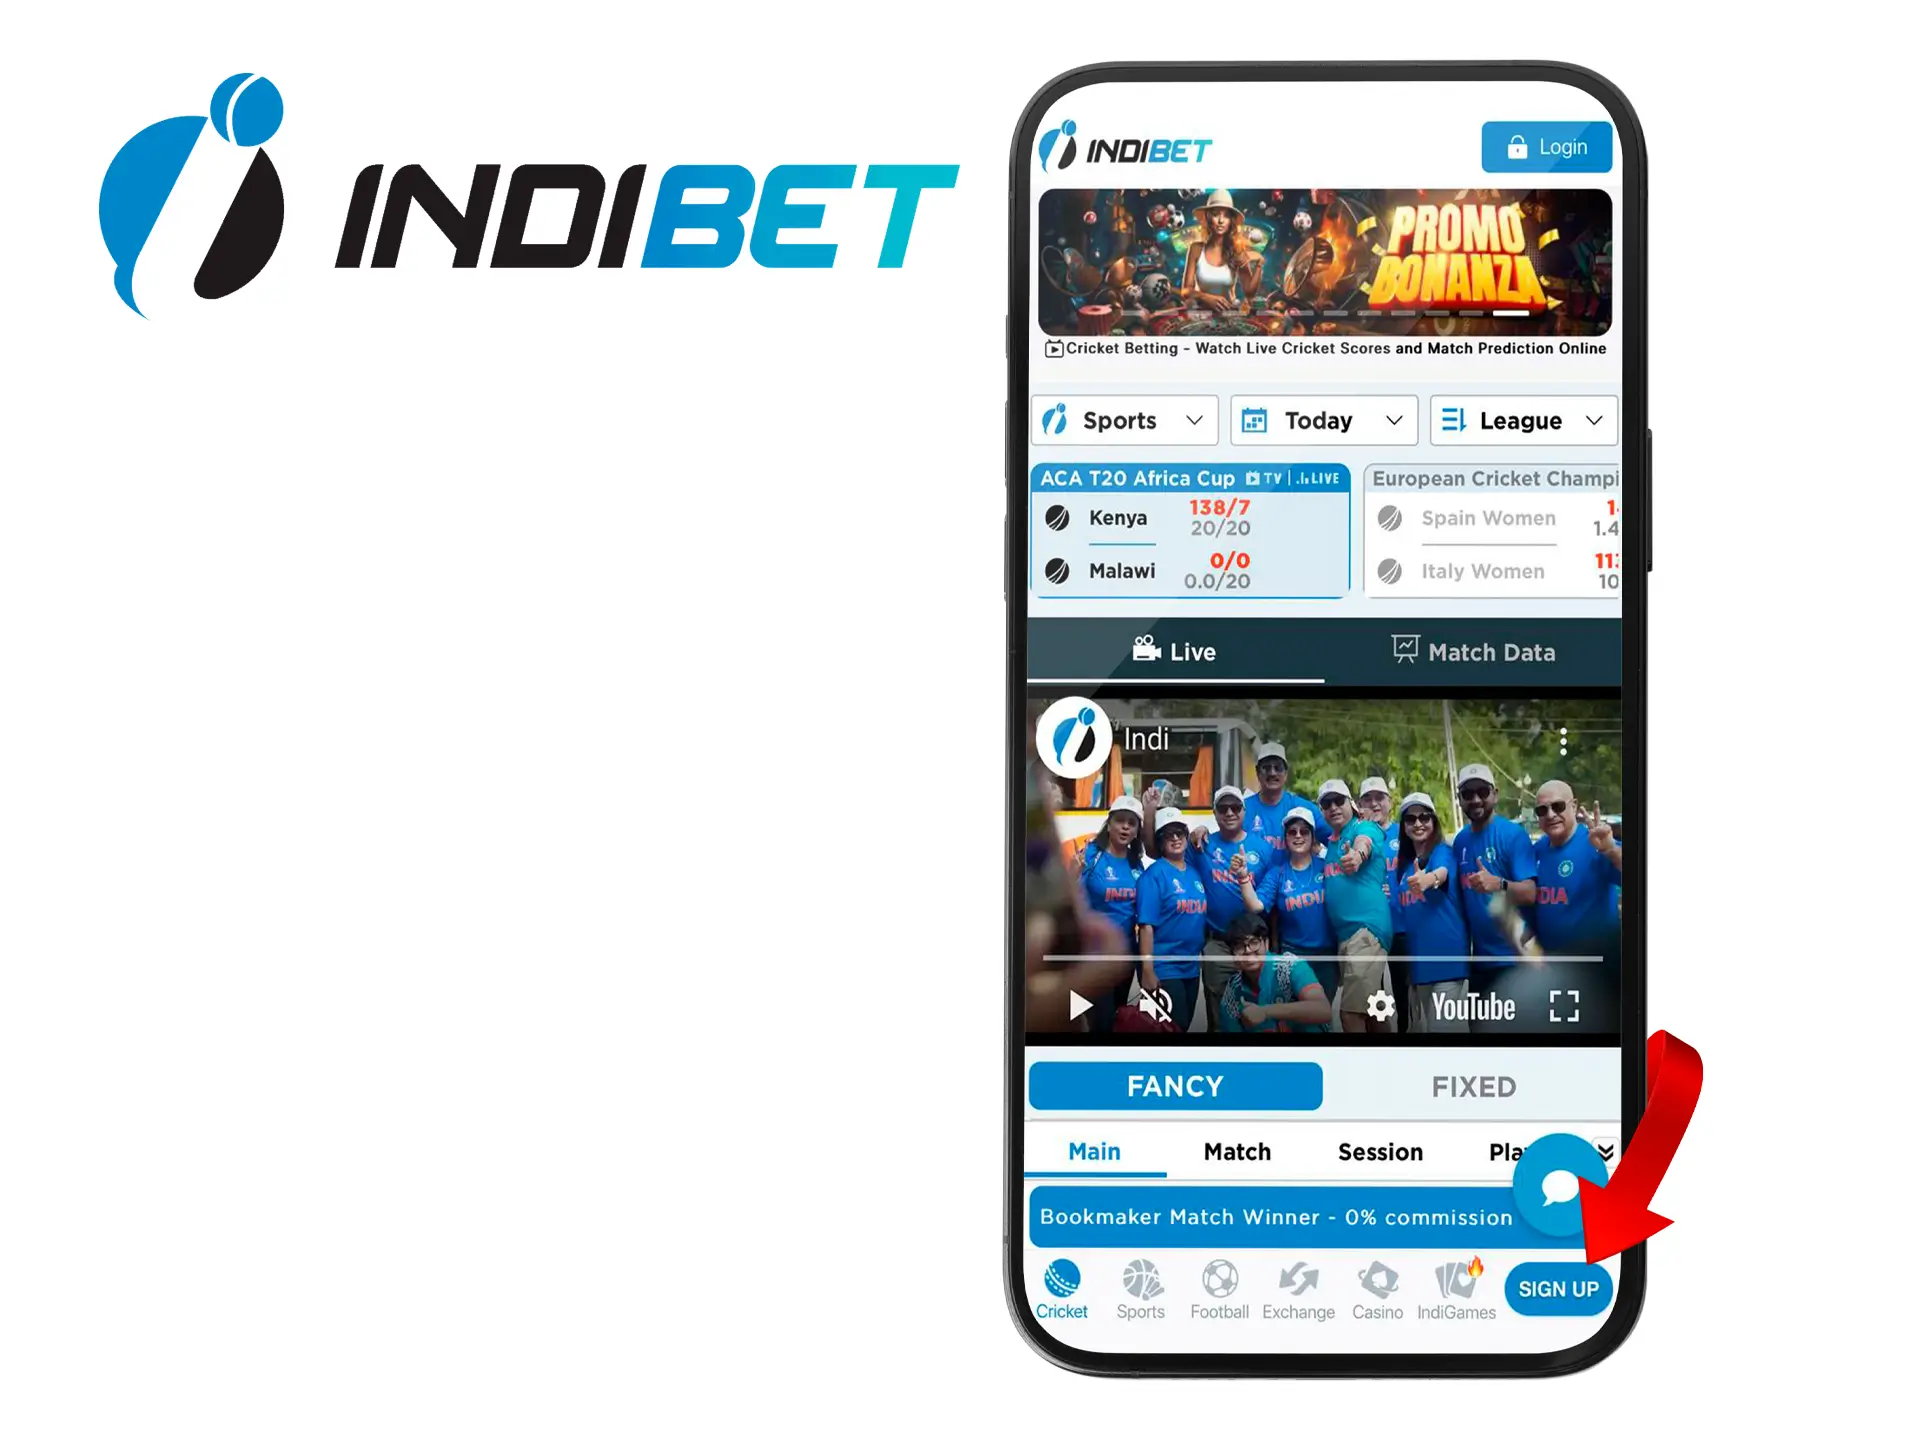 Proceed to register with Indibet.